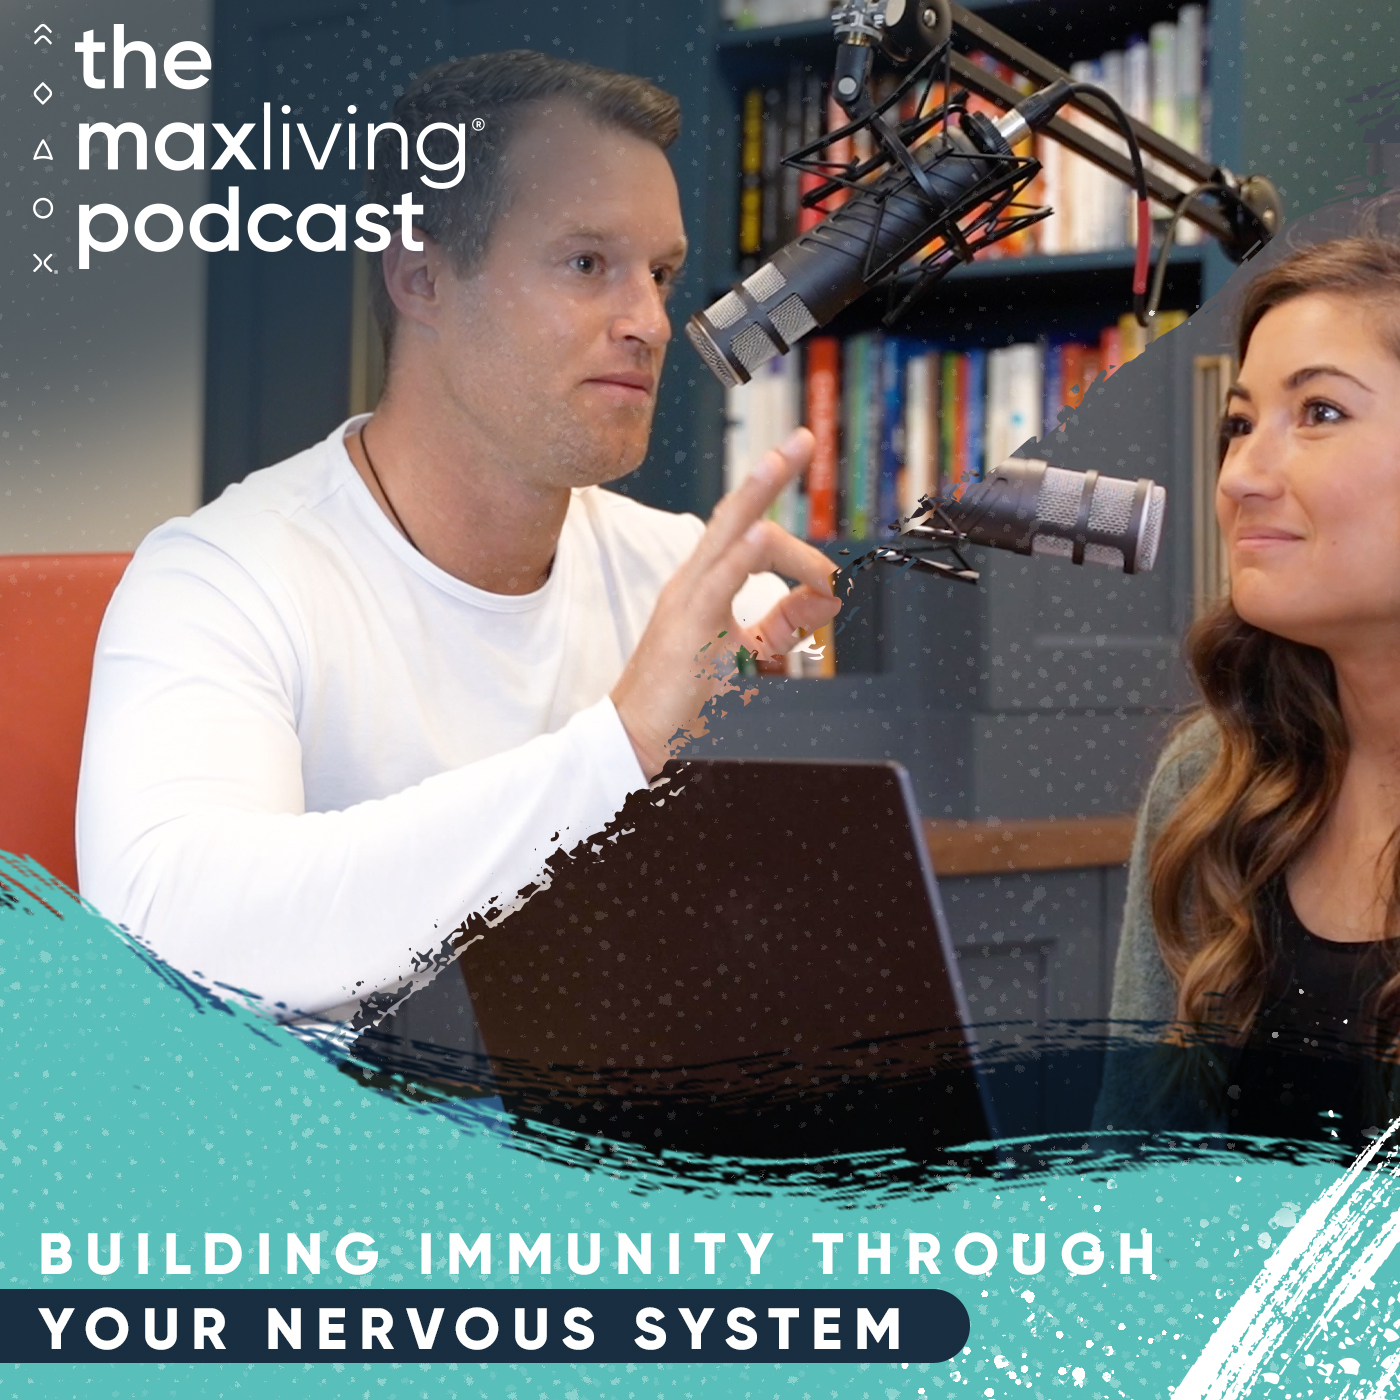 Episode 26 - Building Immunity Through Your Nervous System